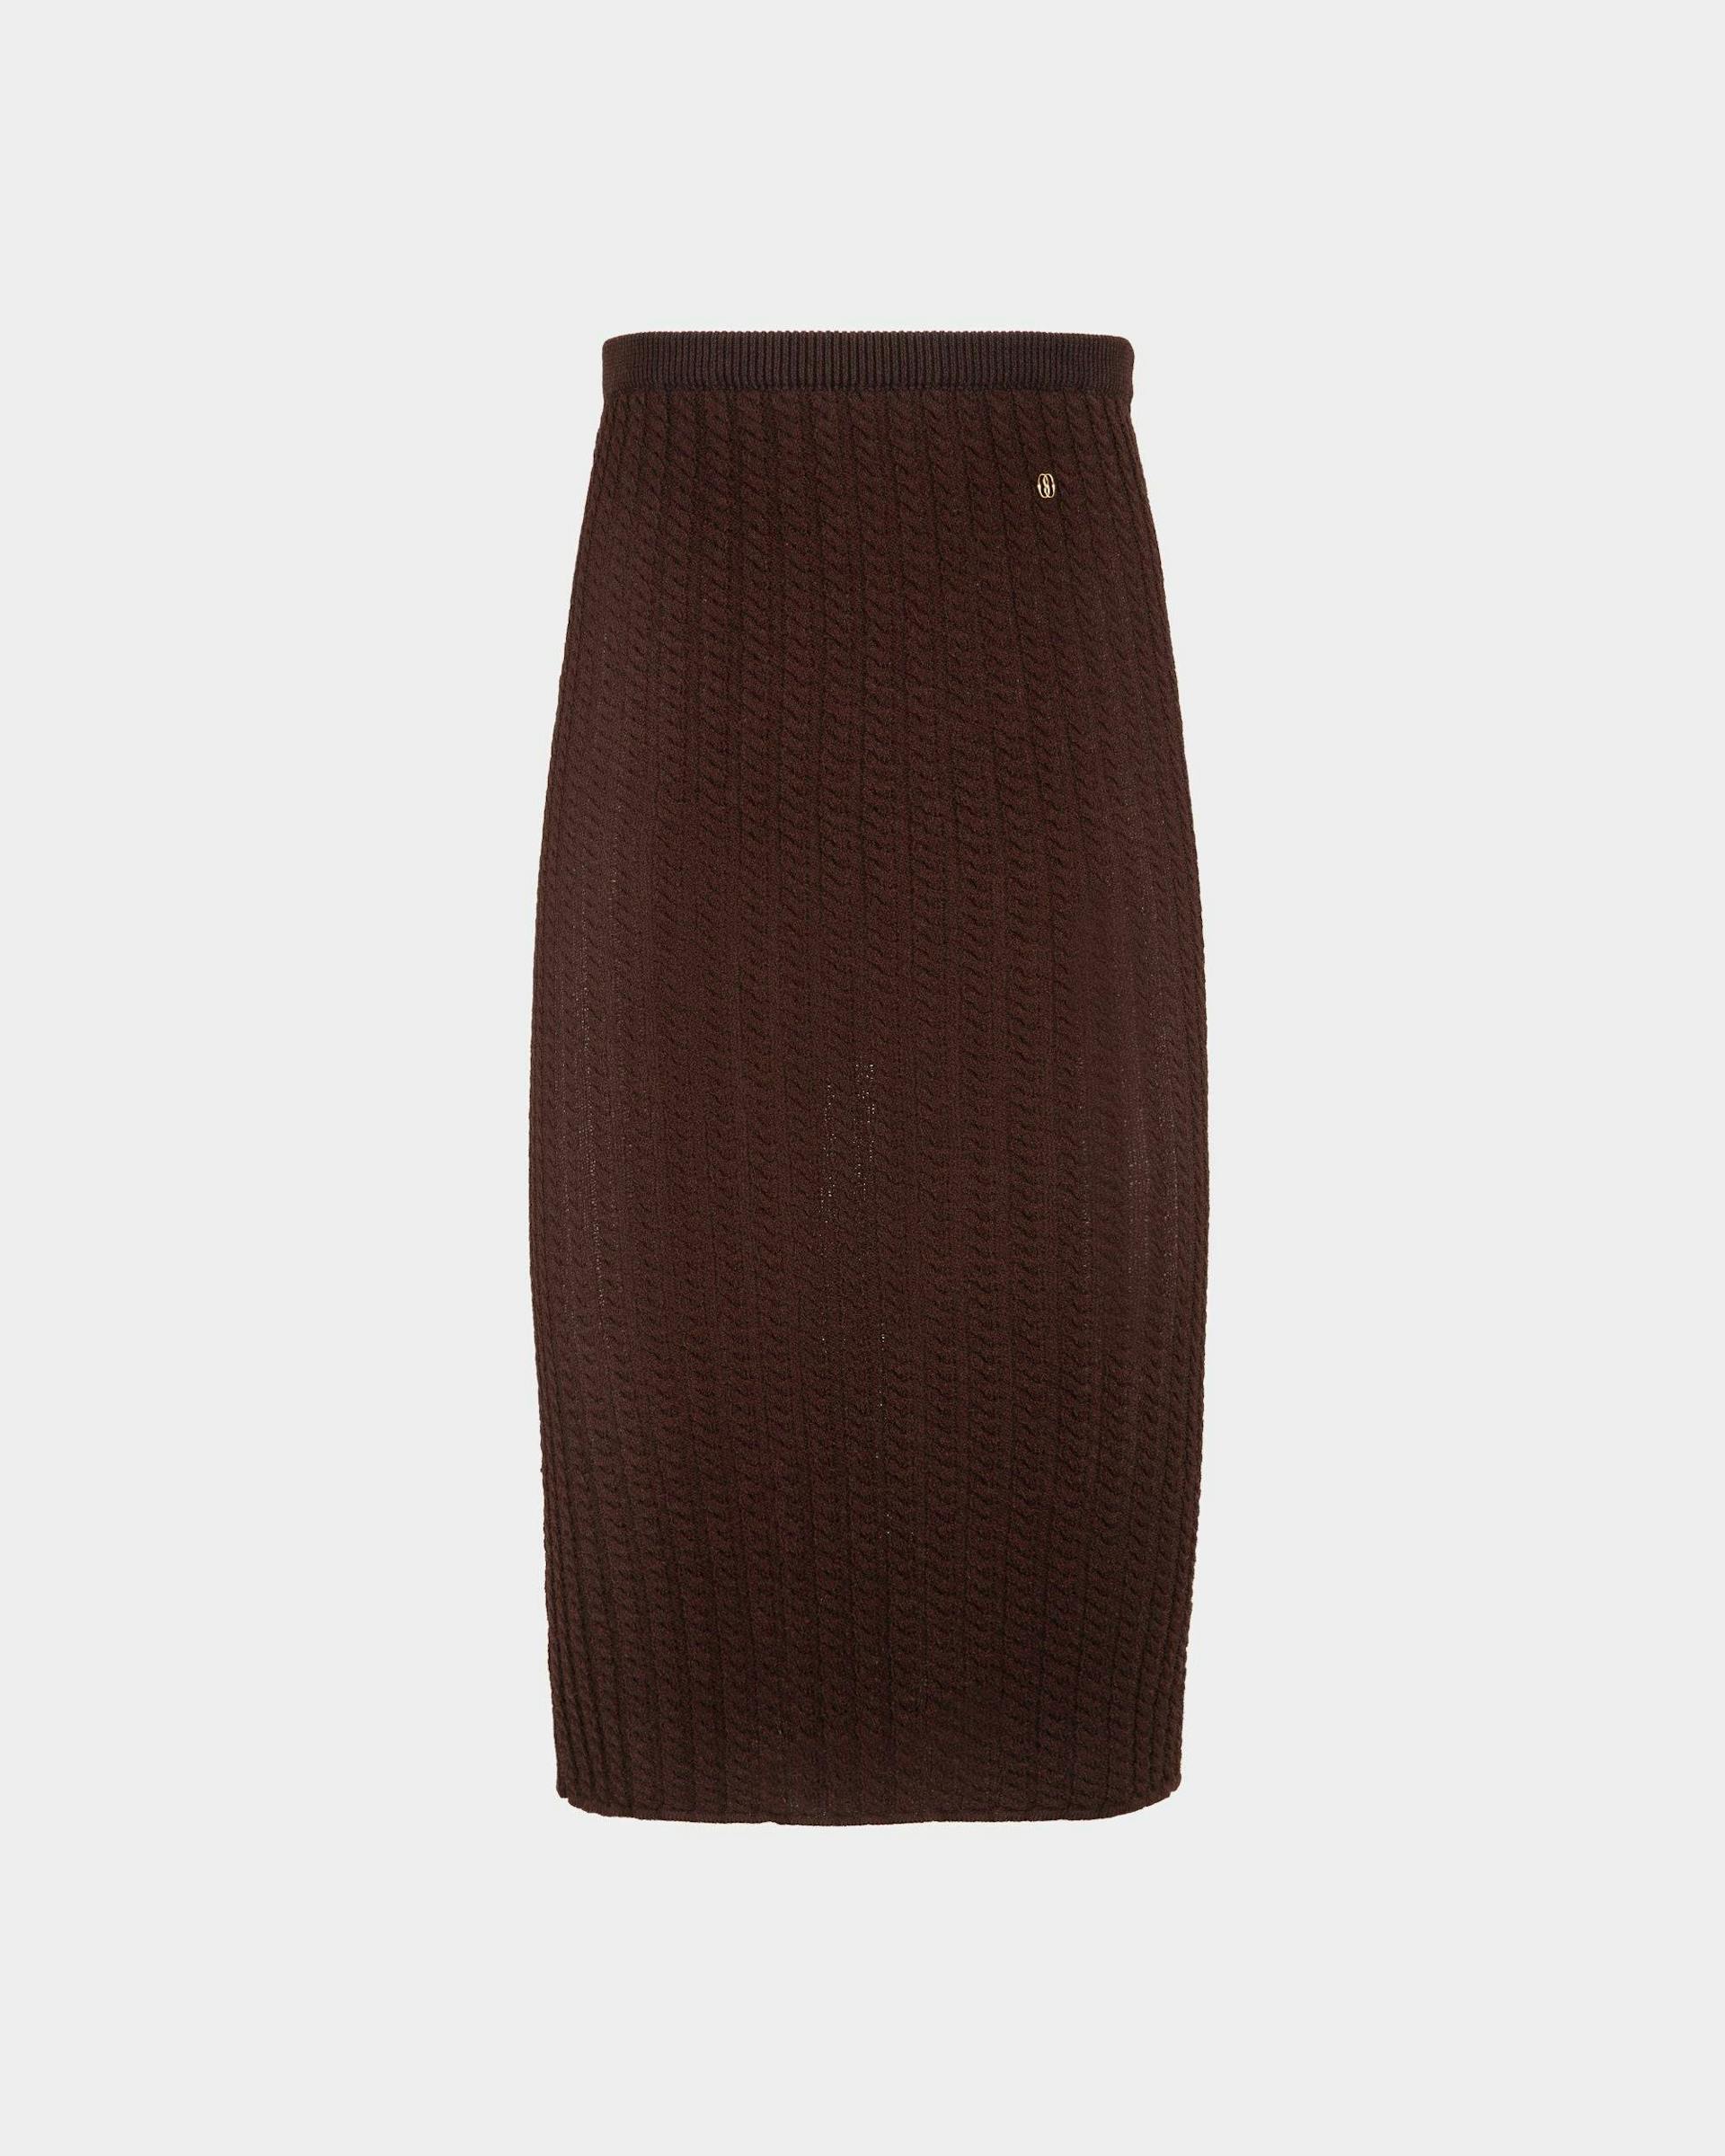 Women's Midi Skirt in Brown Cable Knit Fabric | Bally | Still Life Front